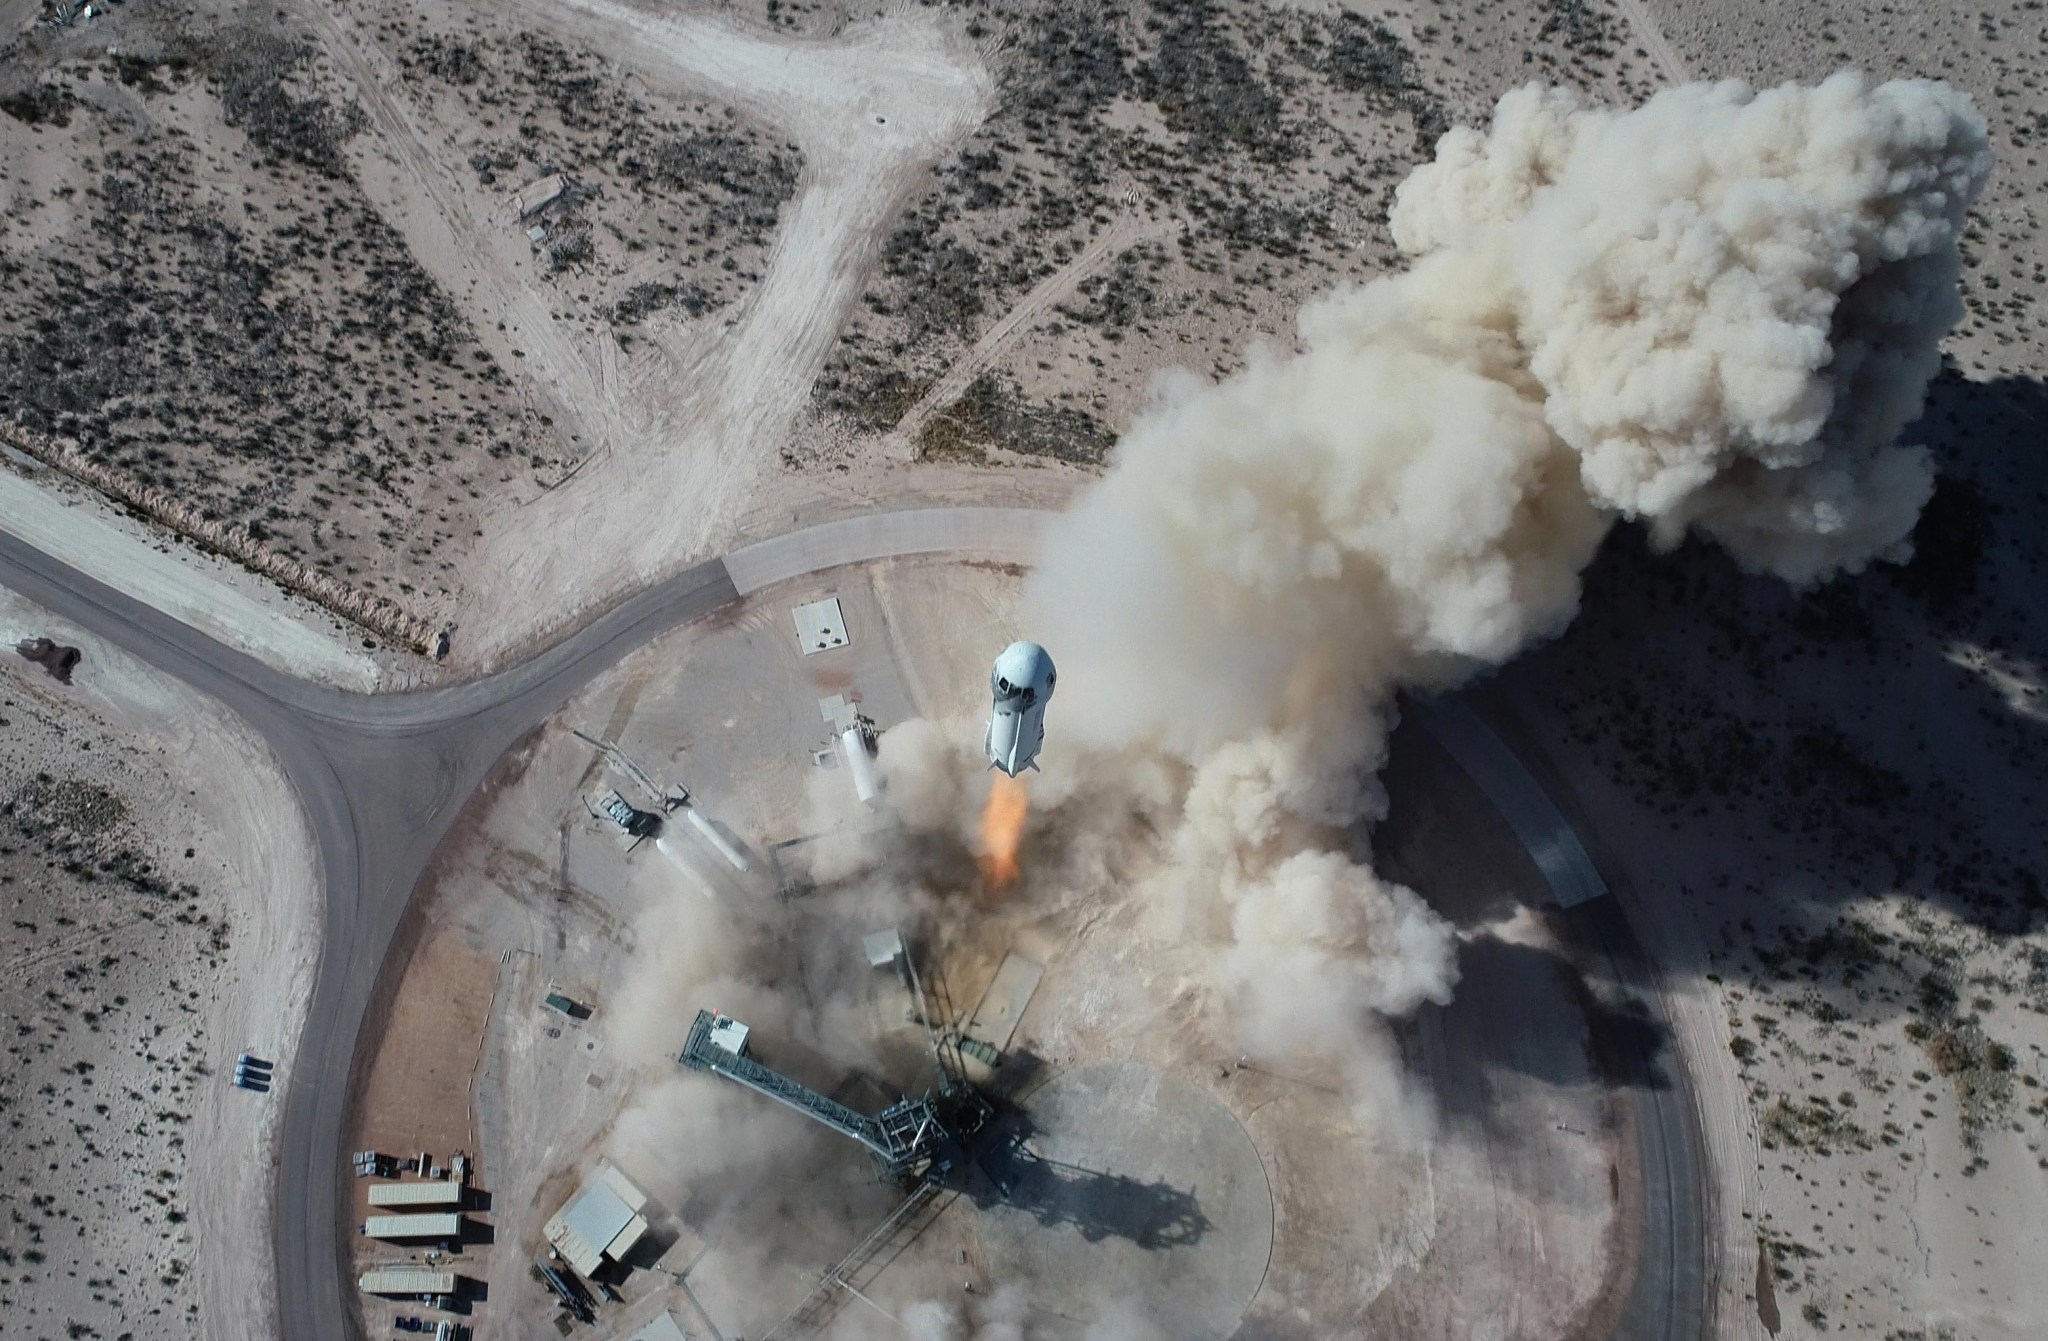 Aerial view of a desert area. Fire emerges from bottom of rocket rising from launchpad. Smoke and dust billow skyward.